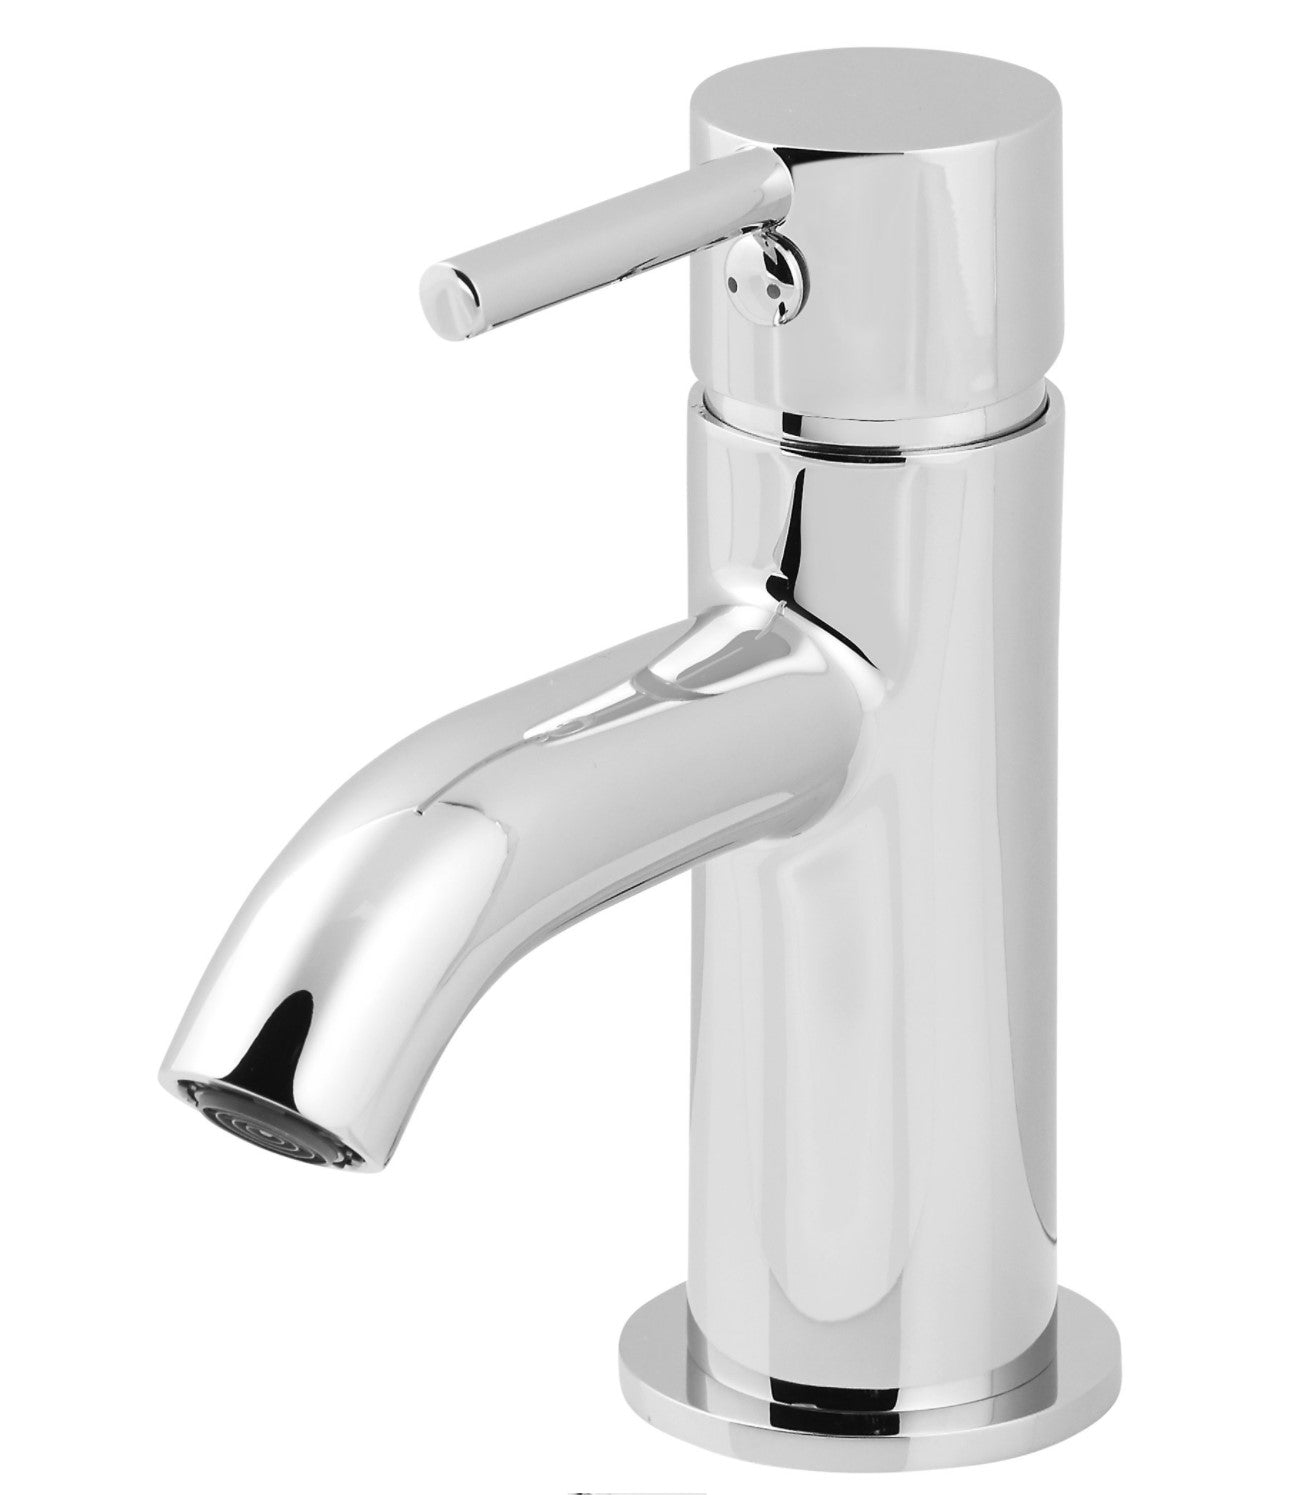 GoodHome Hoffell 1 lever Mini/ Medium Contemporary Basin Mono mixer Tap Pack of 2 2877